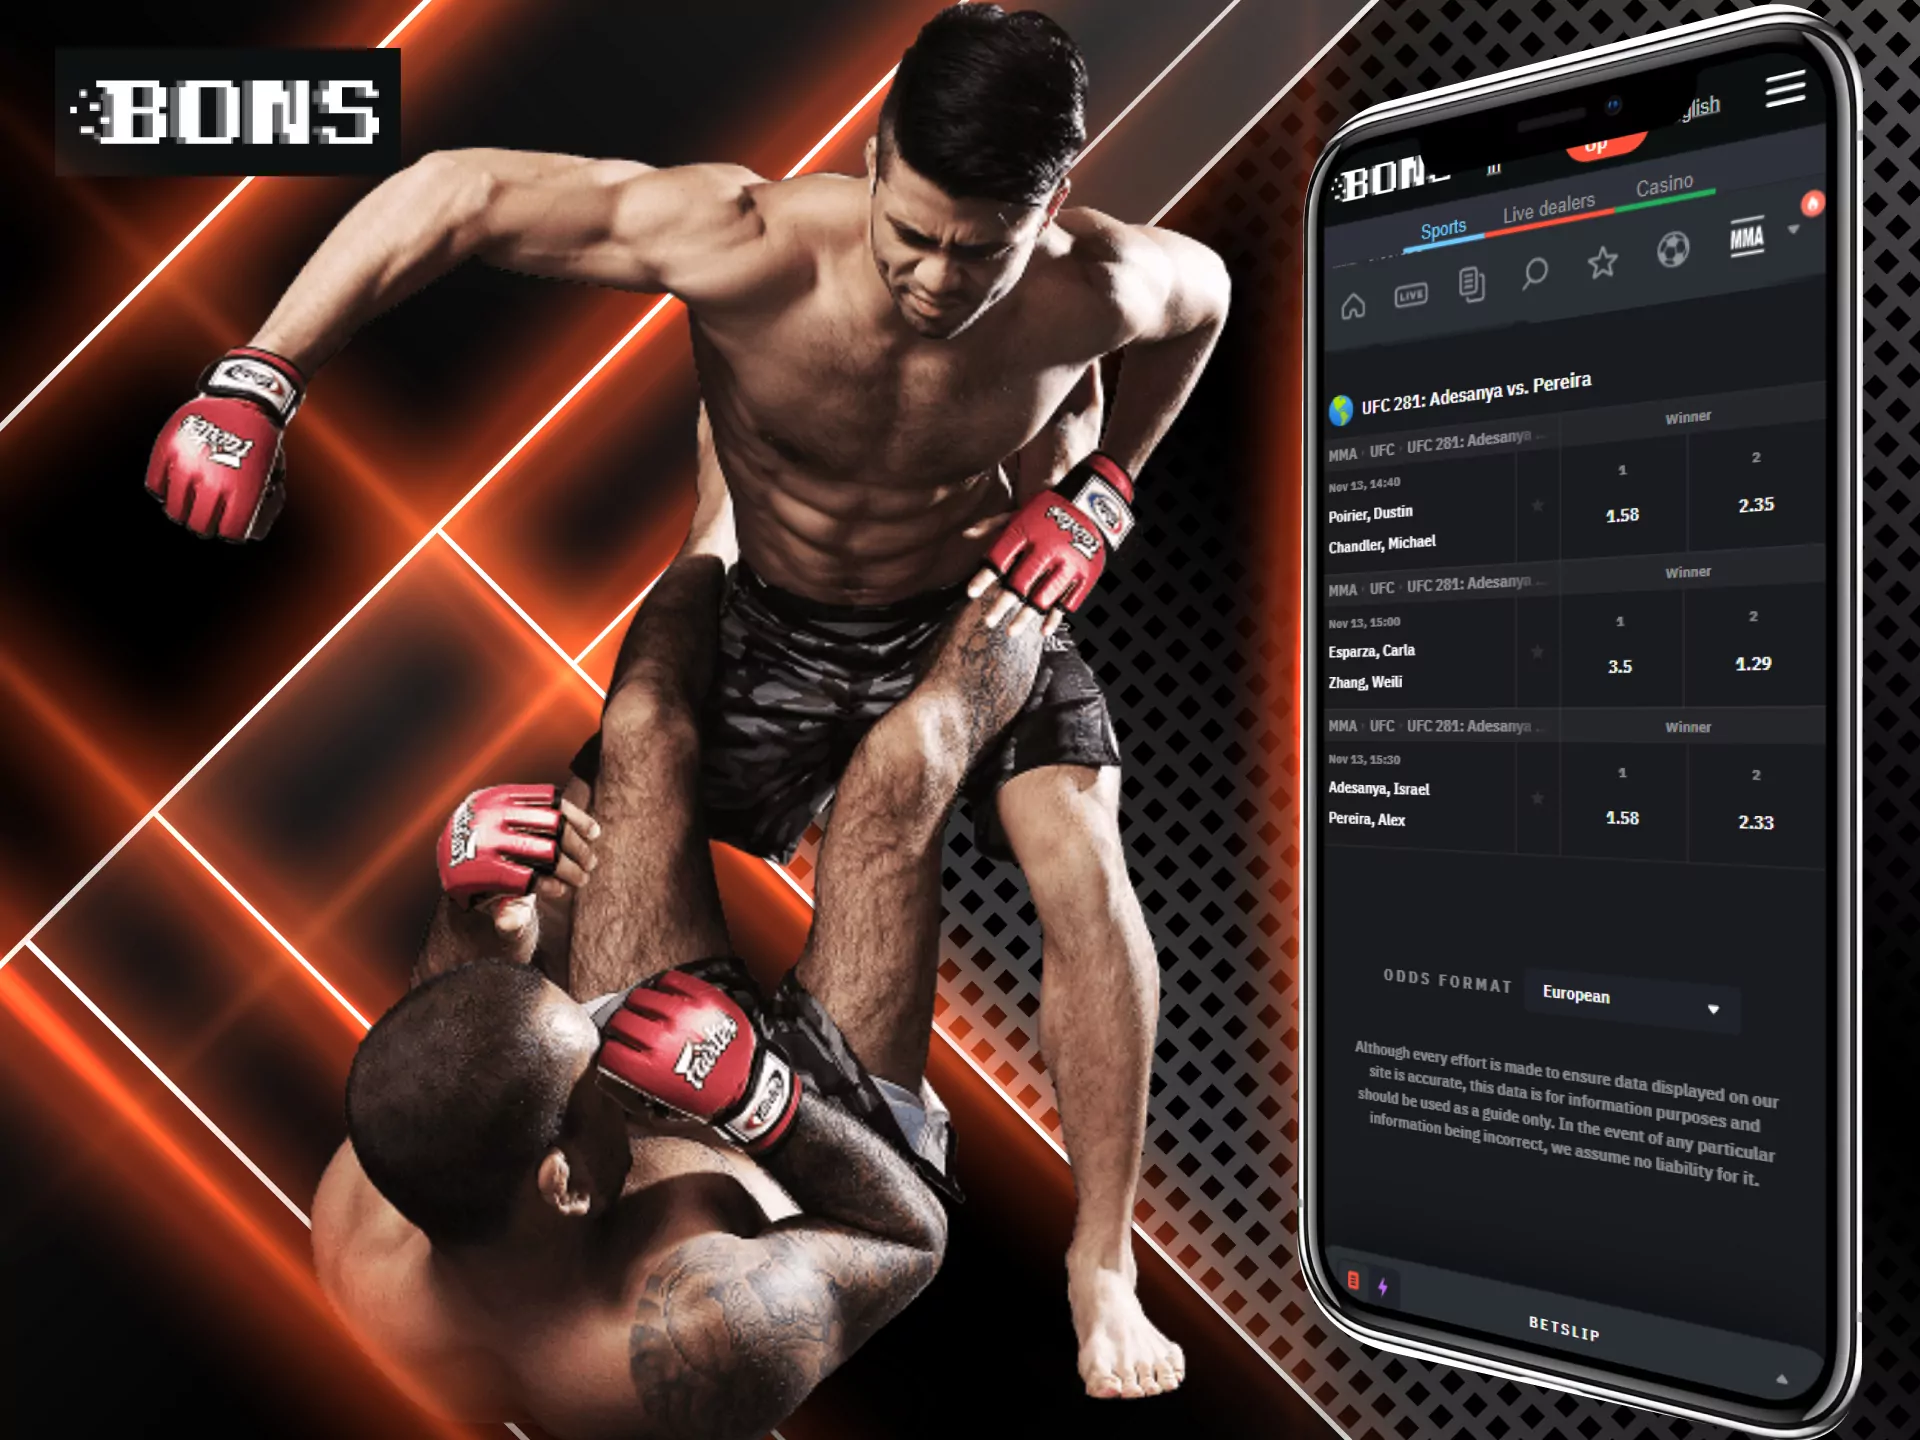 UFC events are available for betting in the Bons app.